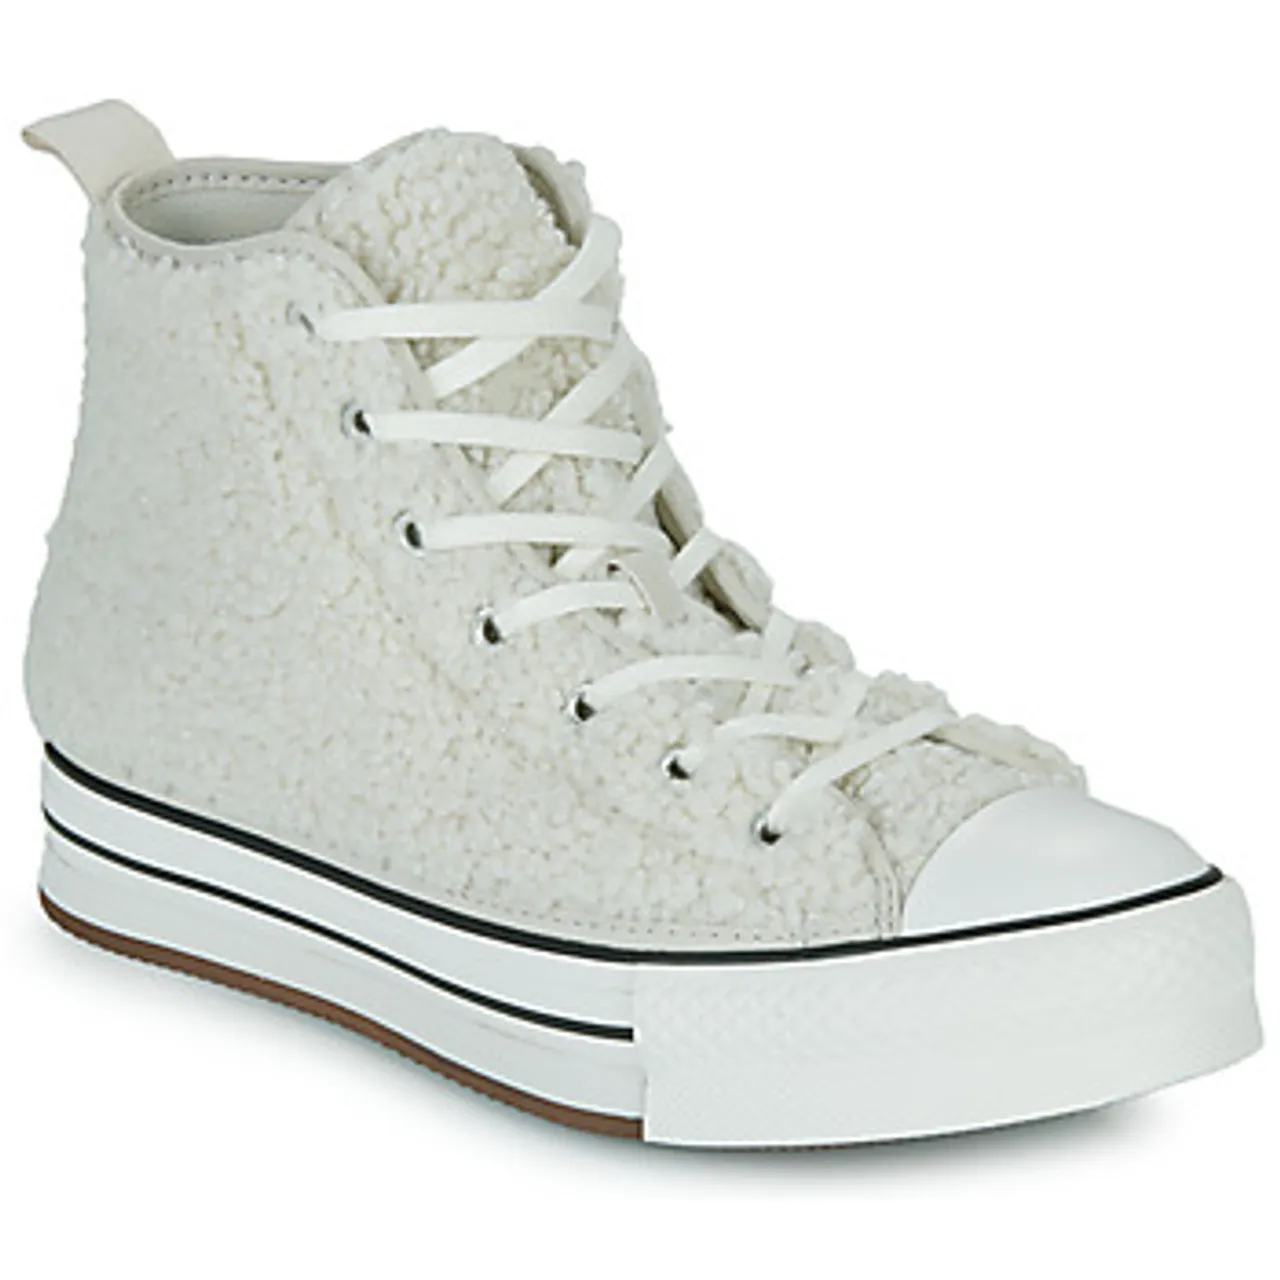 Converse  Chuck Taylor All Star Eva Lift Platform Sherpa Hi  girls's Children's Shoes (High-top Trainers) in White